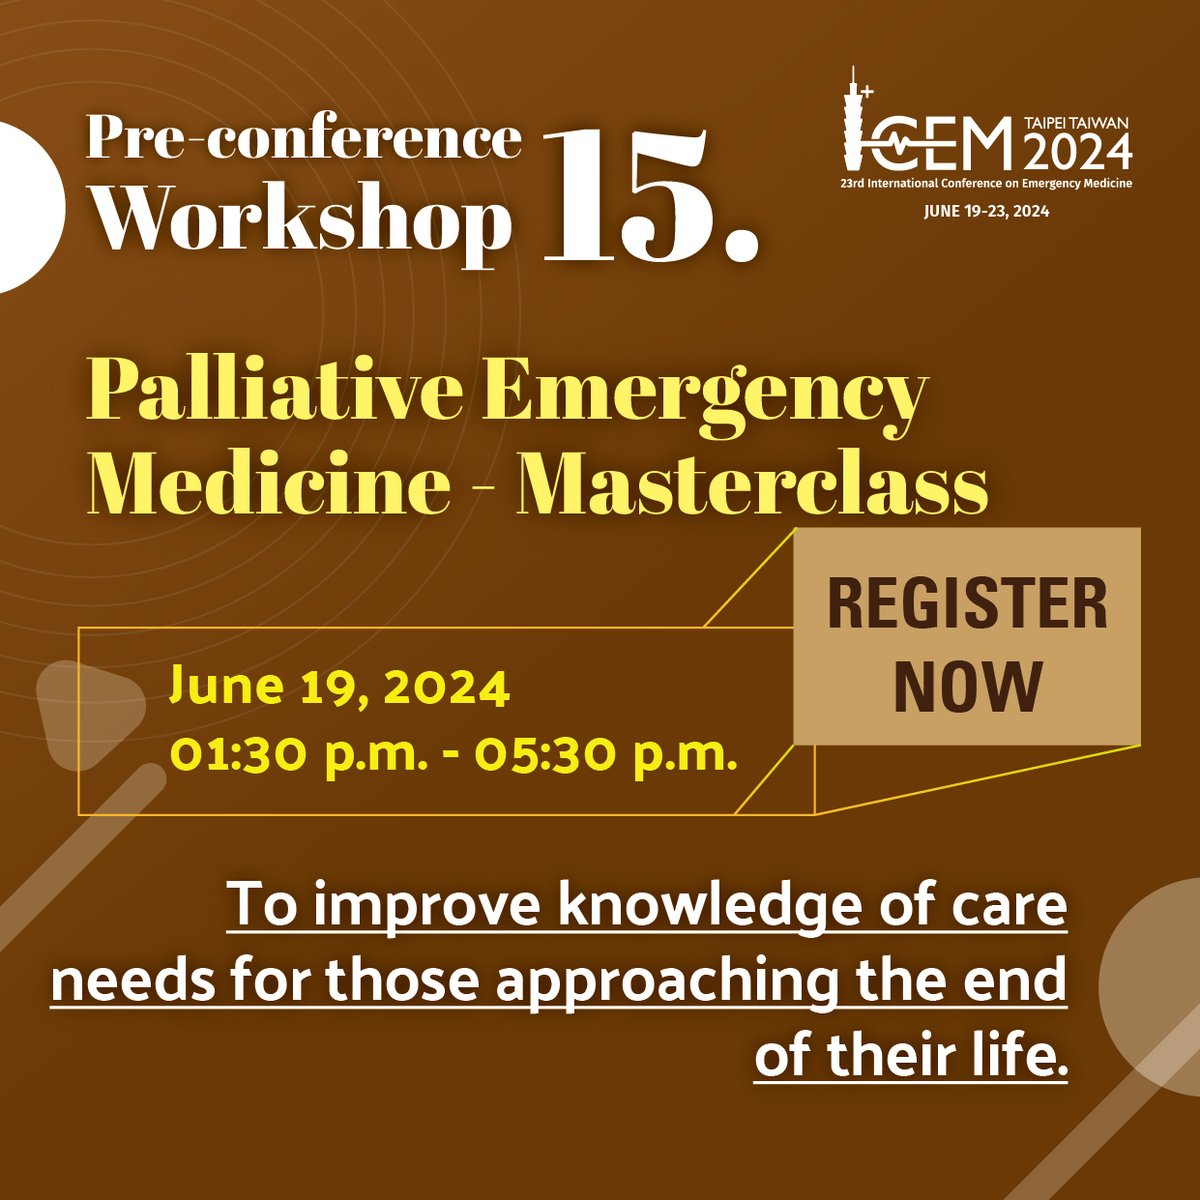 Calling all emergency medicine professionals! Elevate your skills with our preconference workshops designed to sharpen your clinical expertise and enhance patient care. Palliative Emergency Medicine - Masterclass June 19, 2024 Learn more and register: icem2024.com/pre-conference